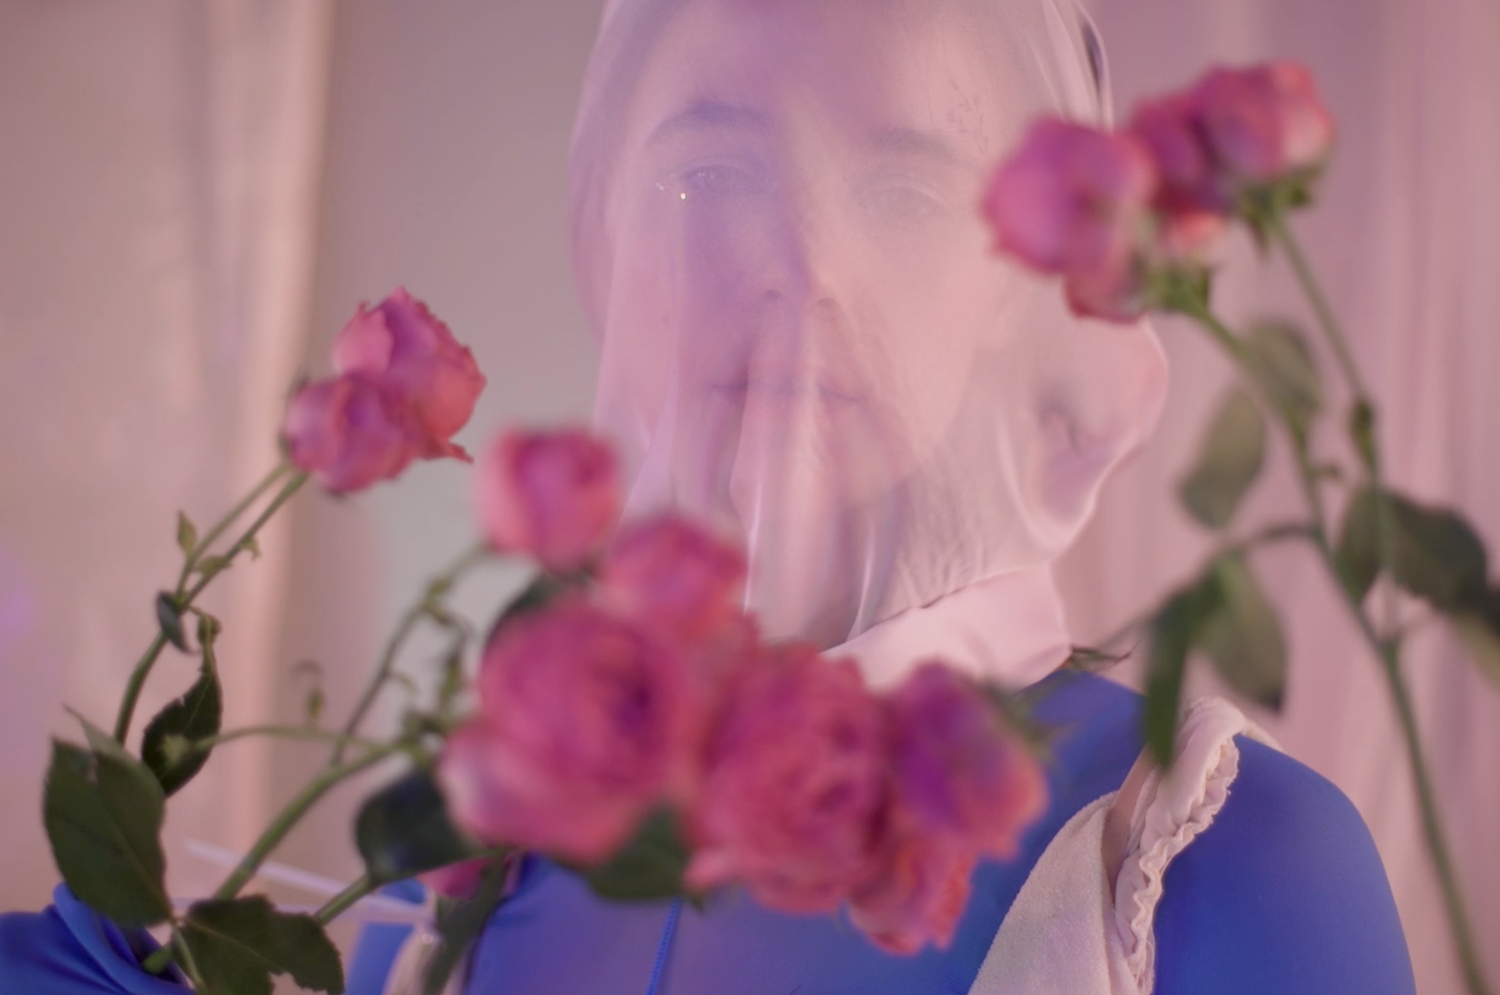 What is beauty? This electronic music video denounces the pressure on women to be perfect